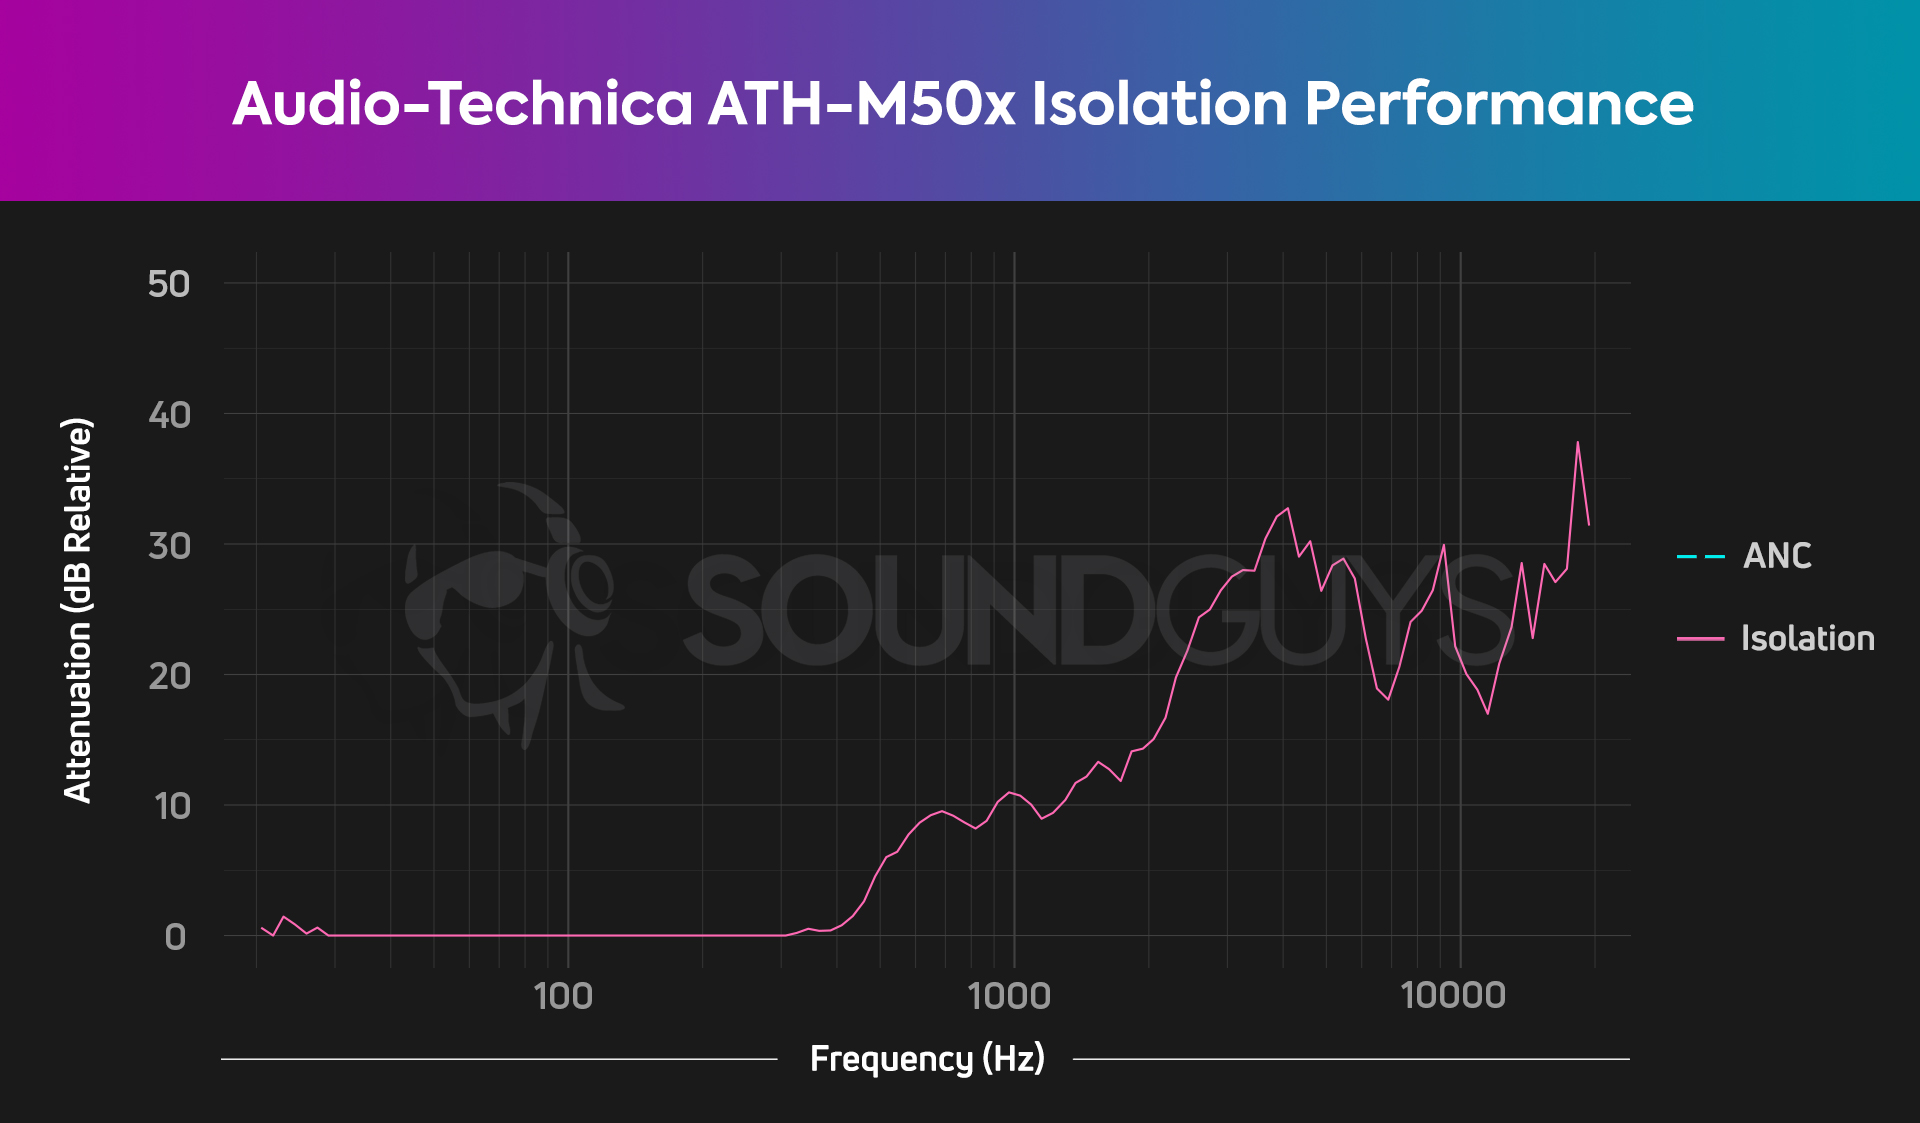 The isolation chart is for the Audio-Technica ATH-M50x.